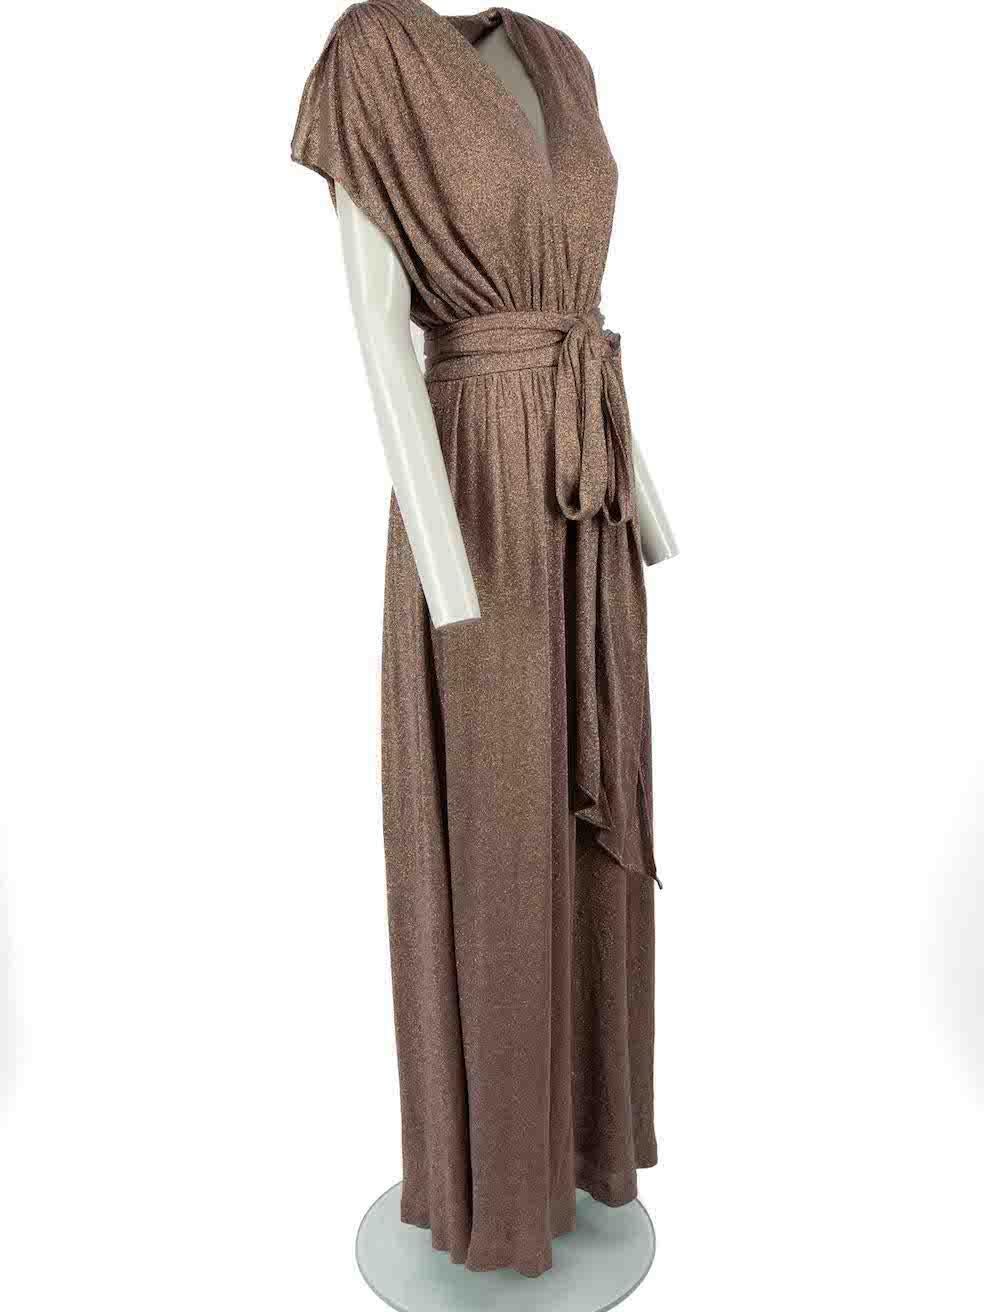 CONDITION is Never worn, with tags. No visible wear to dress is evident on this new Halston Heritage designer resale item.

 Details
 Brown
 Synthetic
 Knit dress
 Maxi
 Sleeveless
 V-neck
 Gold metallic thread
 Side zip fastening
 Belt tie
 Side